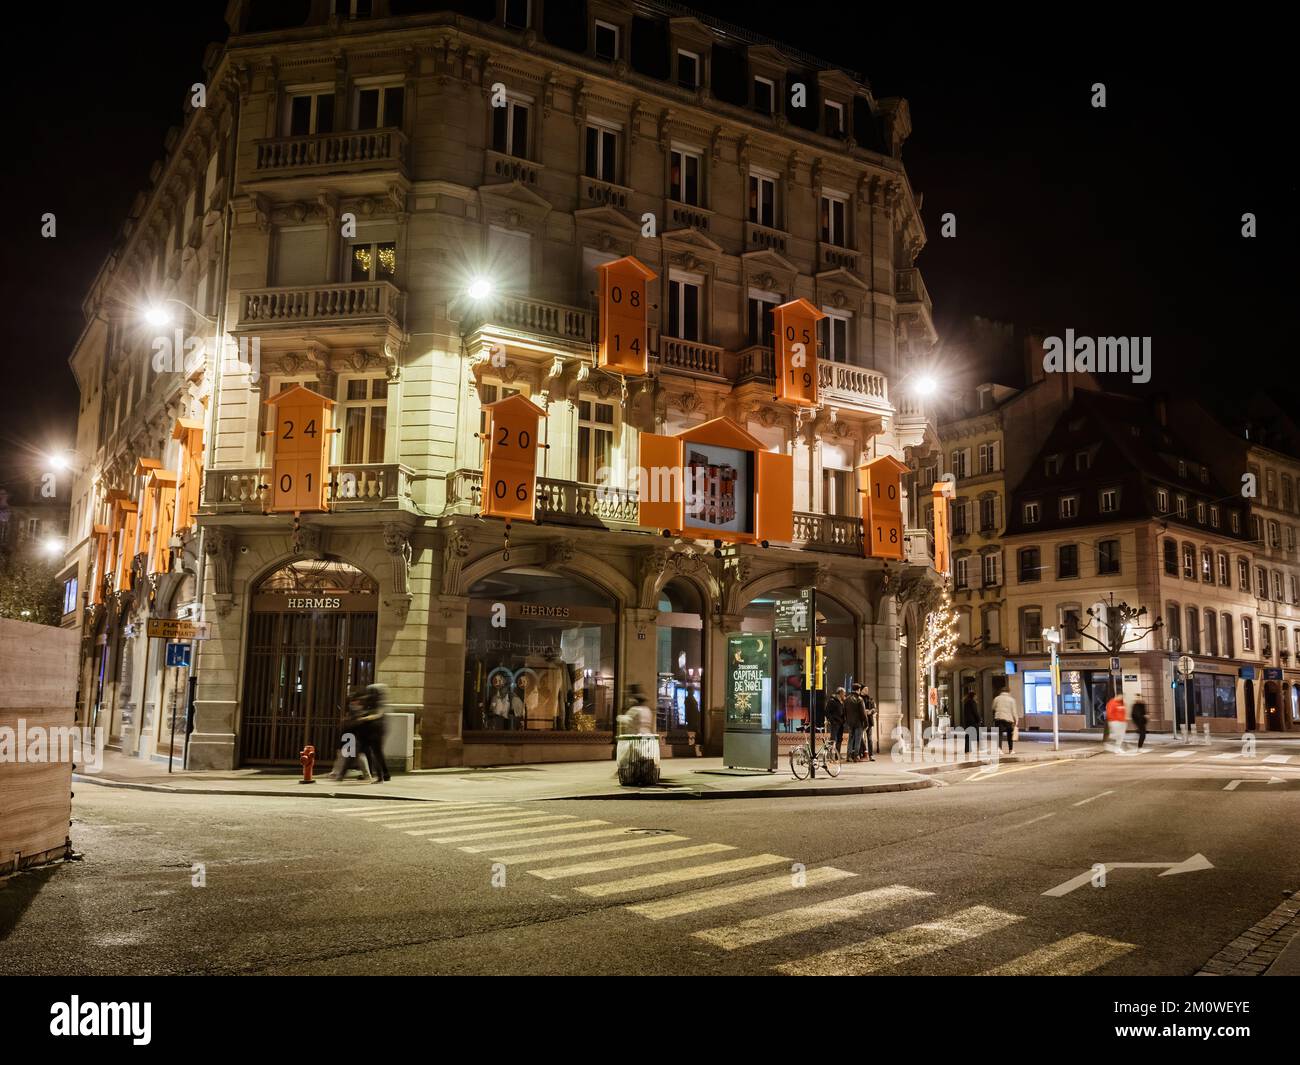 Strasbourg, France - Nov 25, 2022: New luxury hermes flagship store in Place Broglie in central Strasbourg with lights being dimmed due to lack of power electricity Stock Photo